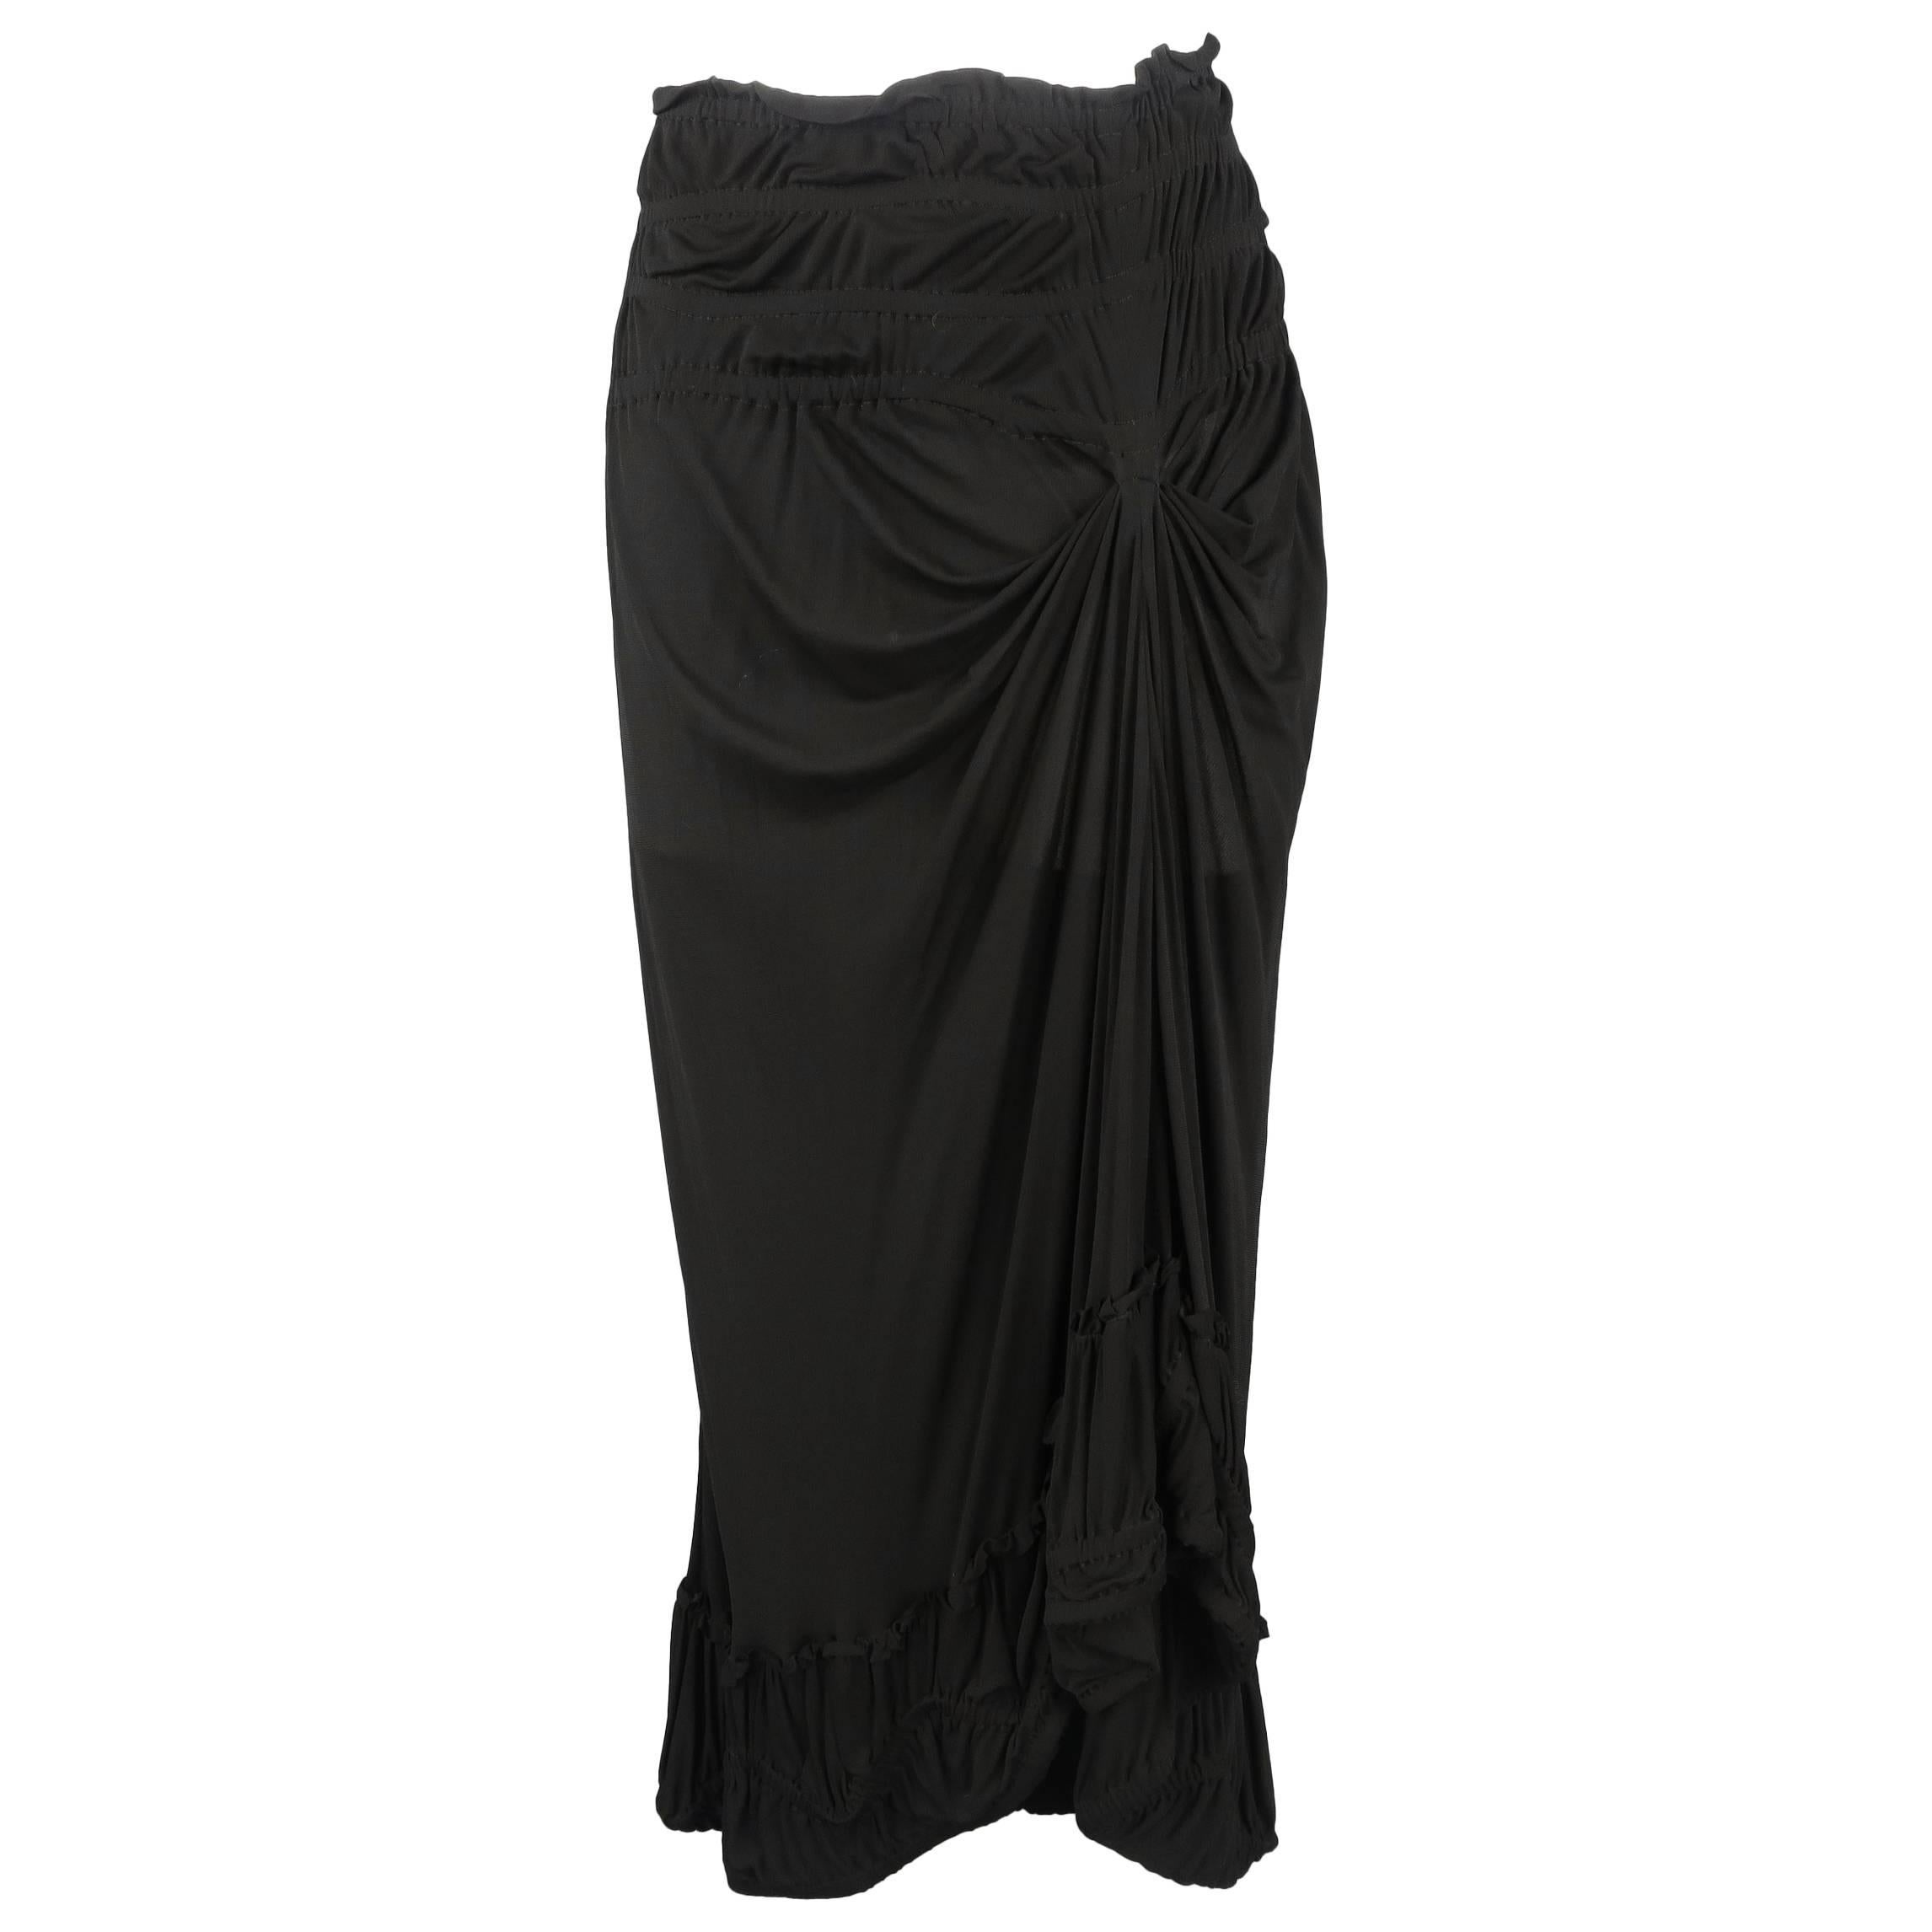 YVES SAINT LAURENT by TOM FORD Size M Black Gathered Viscose Ruffle Skirt